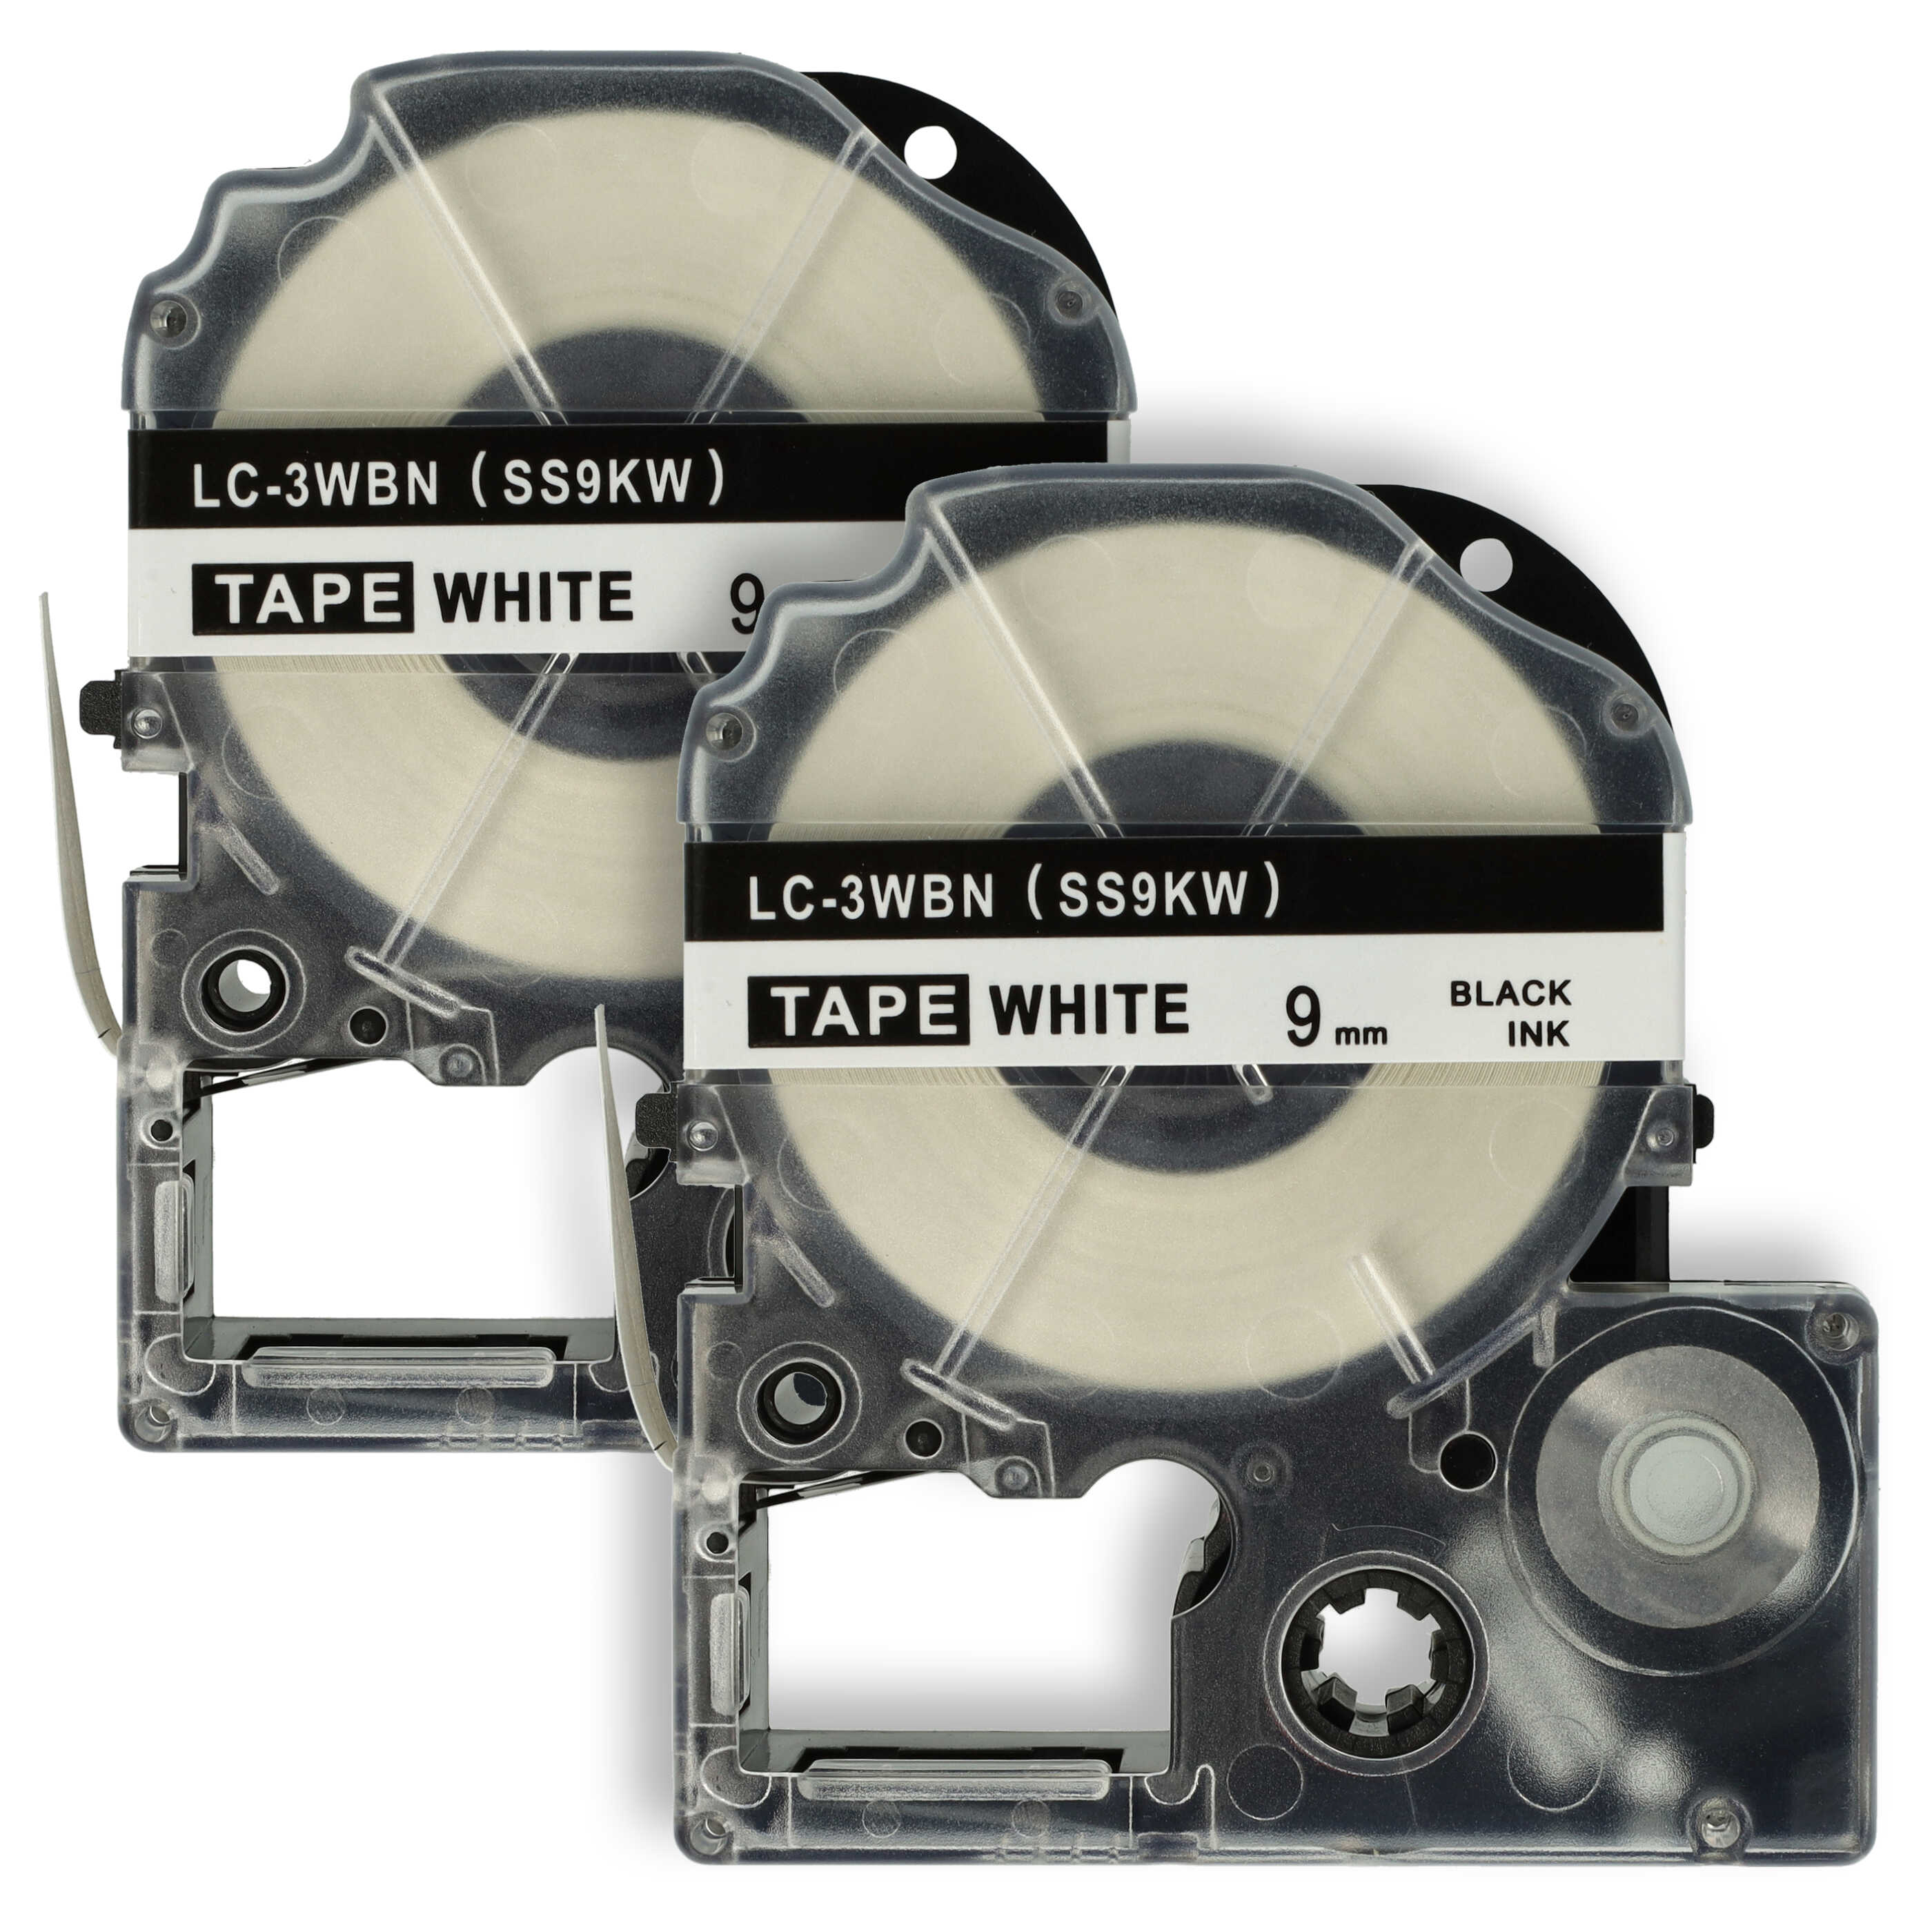 2x Label Tape as Replacement for Epson SS9KW, LC-3WBN - 9 mm Black to White